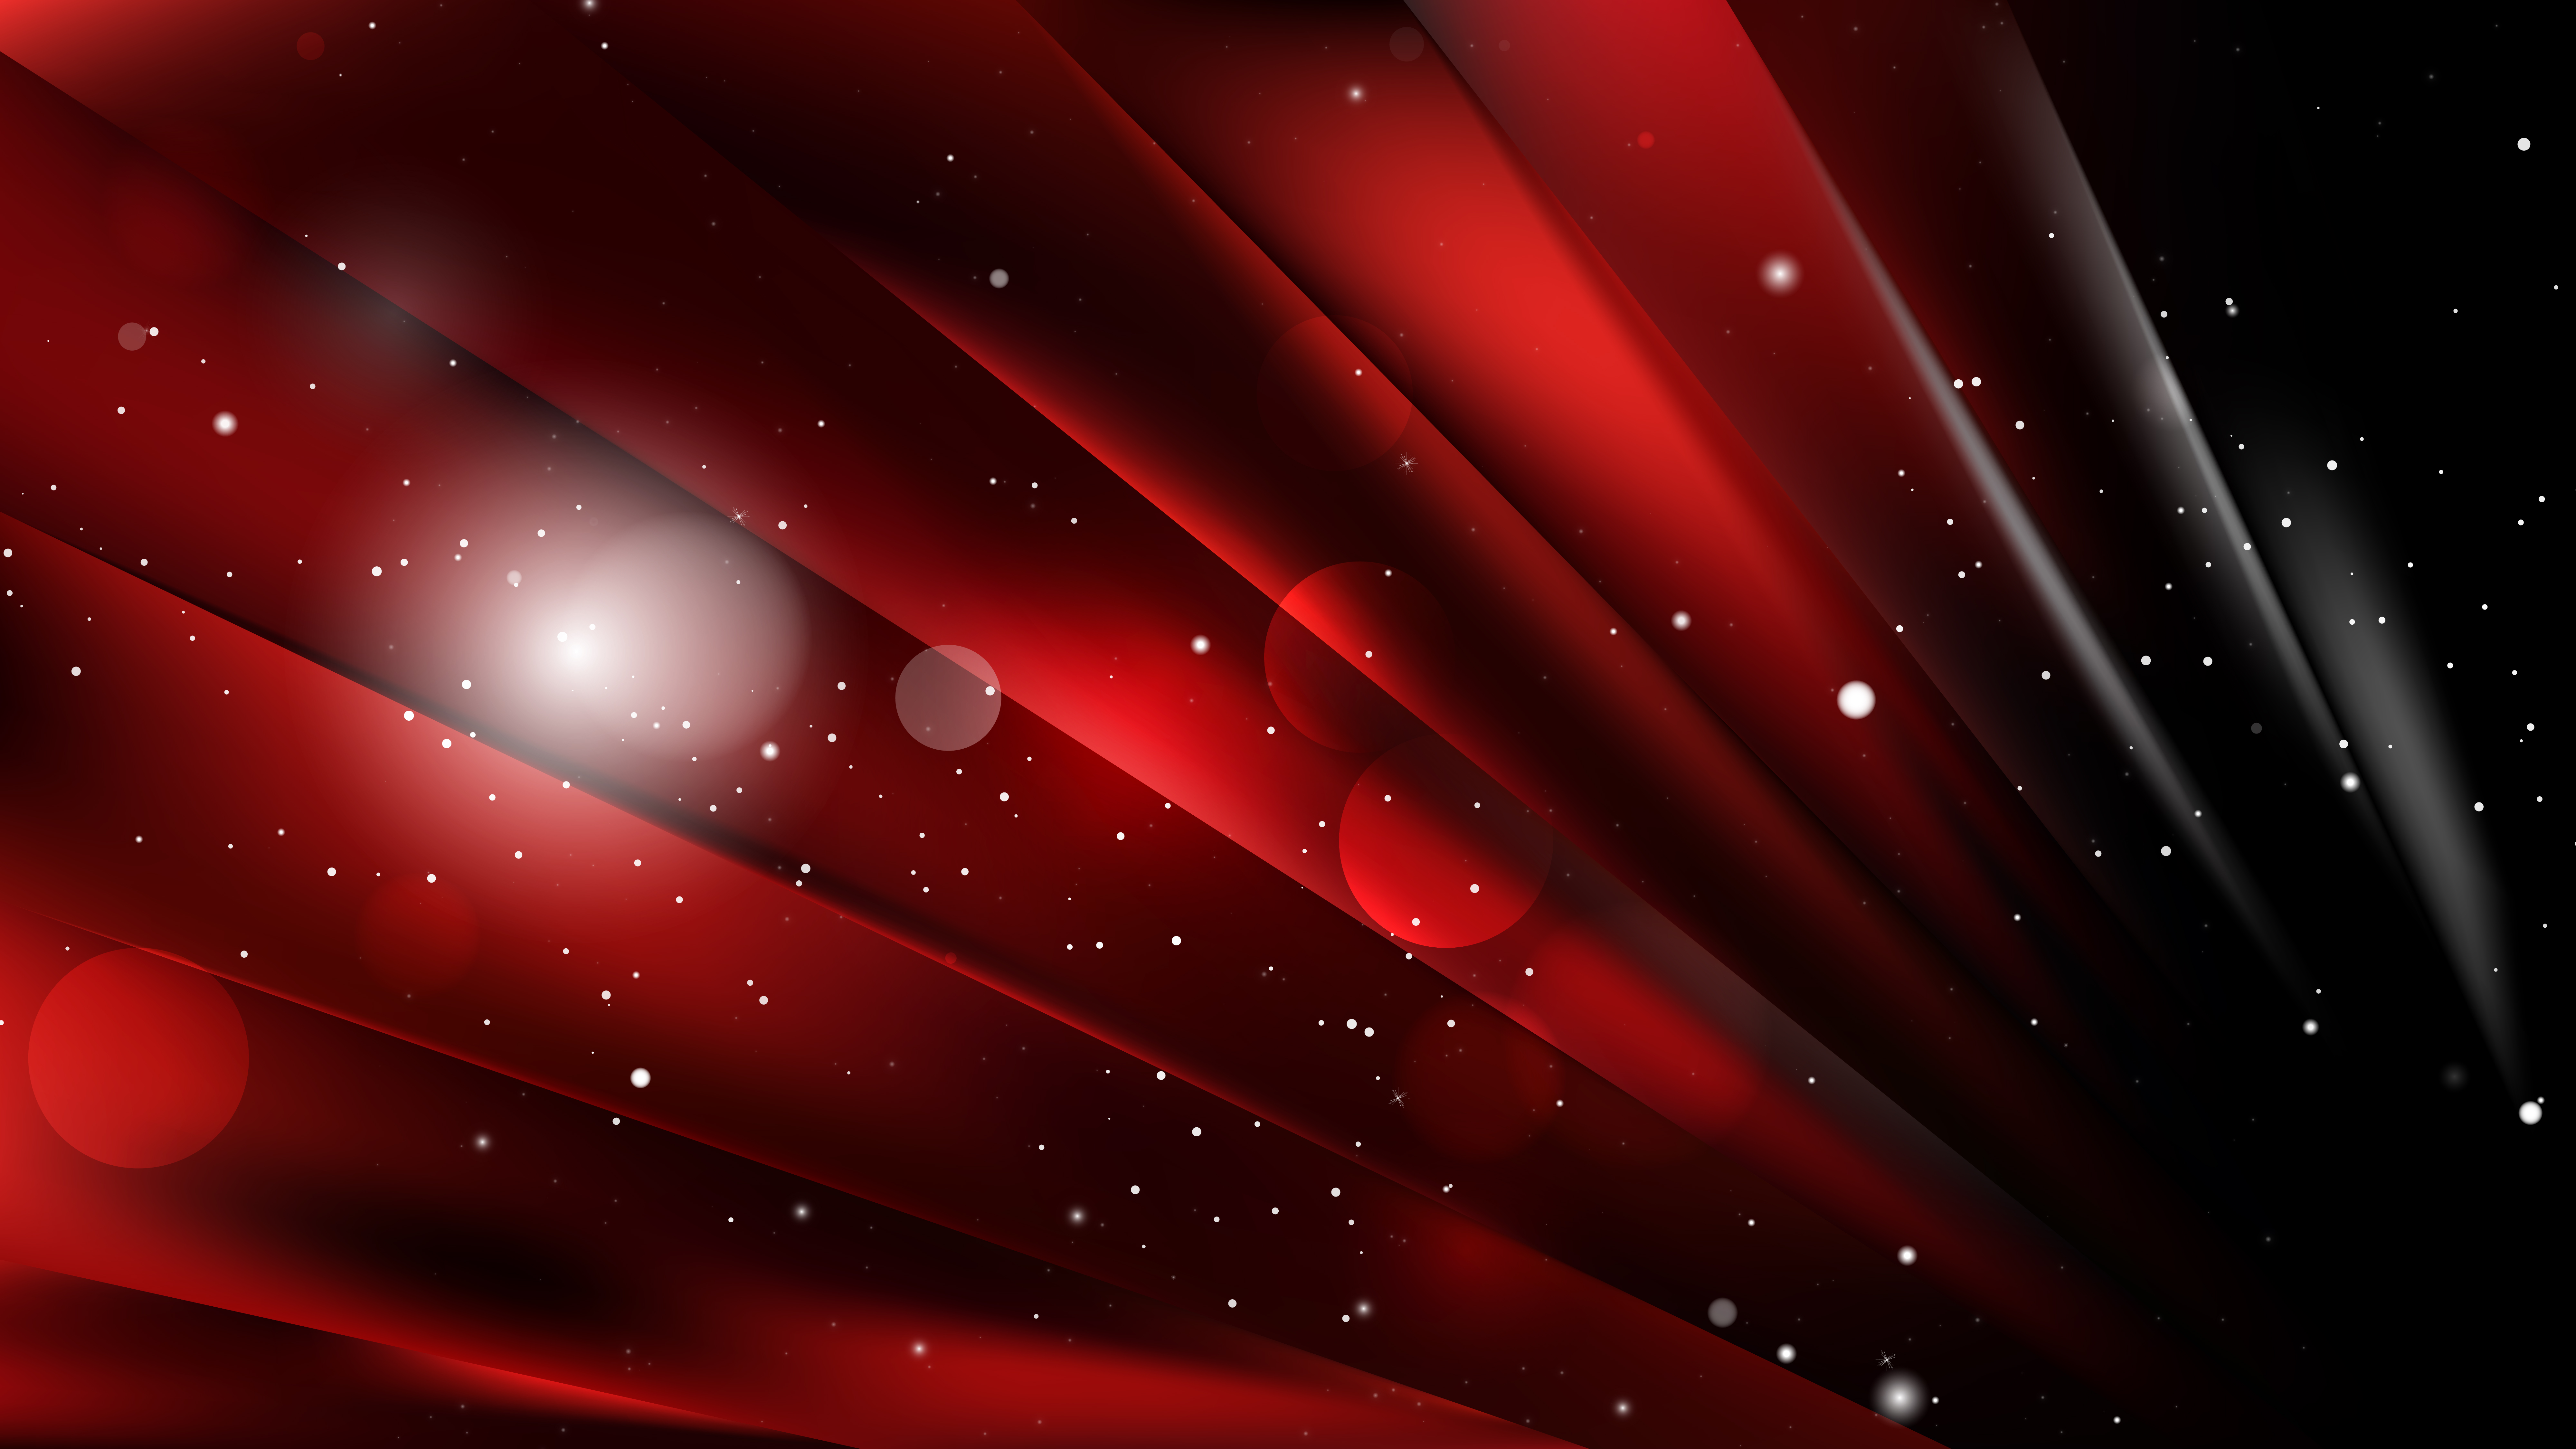 10+ Red Background Design Images – Free Wallpaper